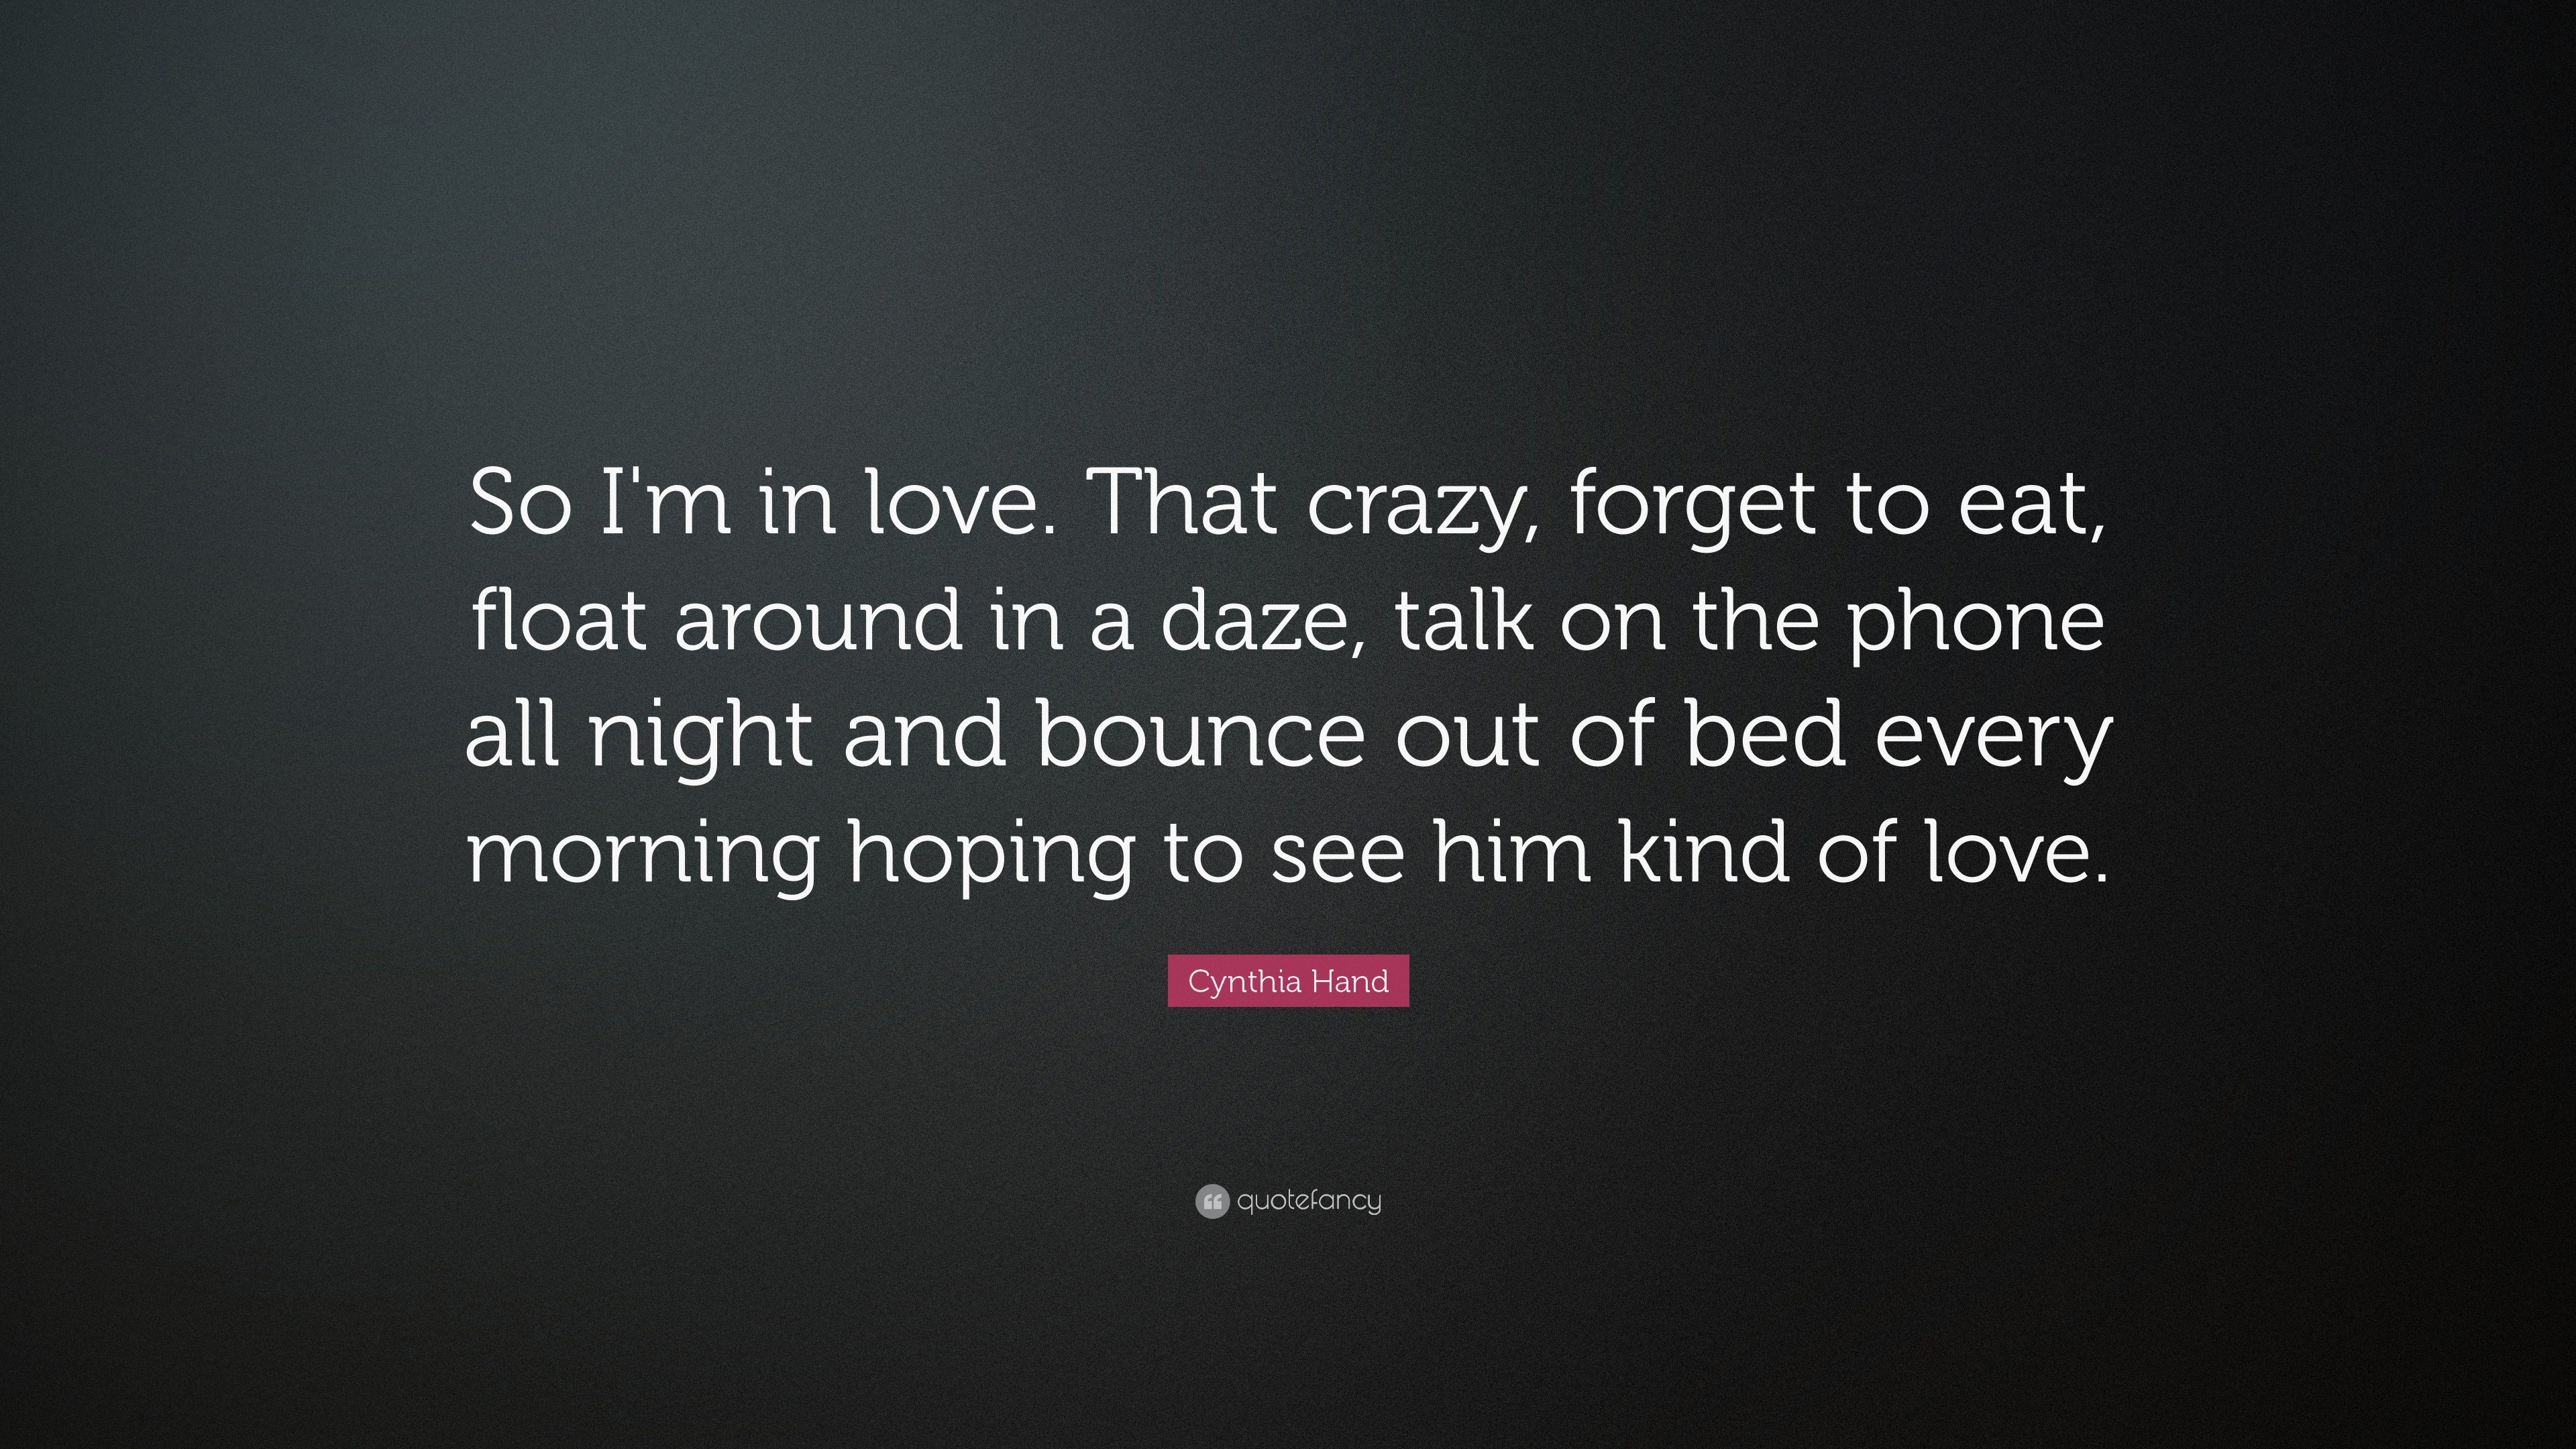 Cynthia Hand Quote: “So I'm in love. That crazy, forget to eat 